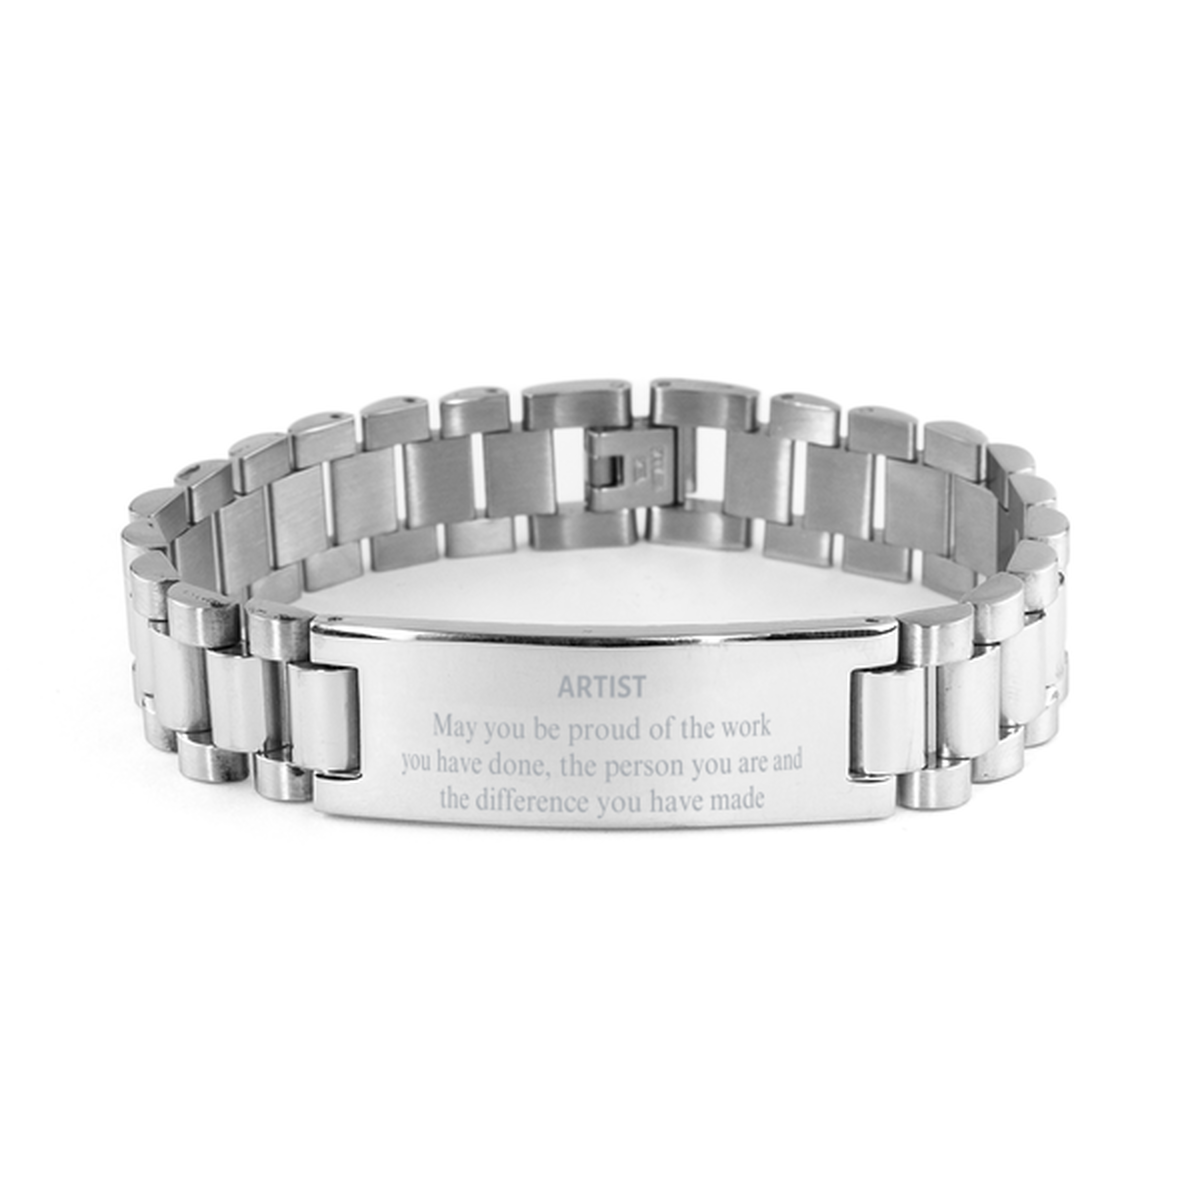 Artist May you be proud of the work you have done, Retirement Artist Ladder Stainless Steel Bracelet for Colleague Appreciation Gifts Amazing for Artist